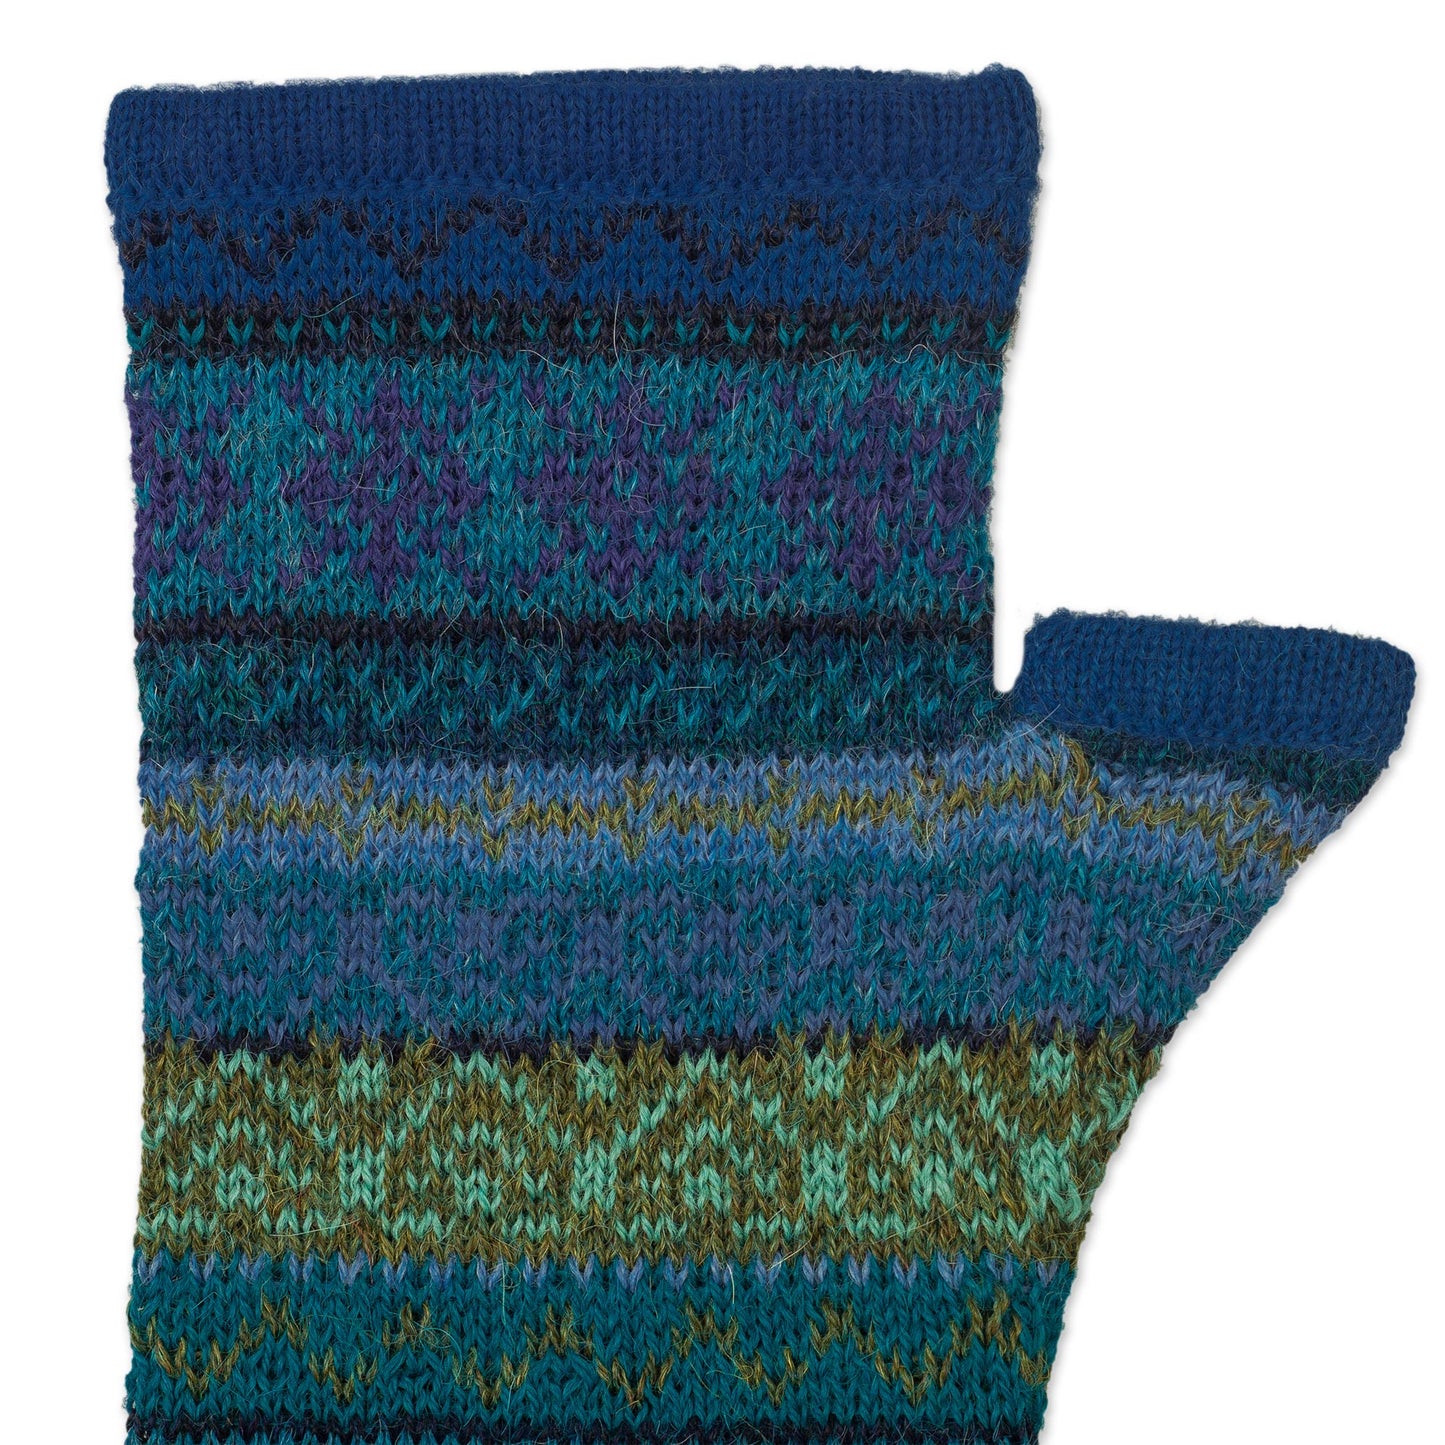 Sea Dreams Shades of Blue and Green 100% Alpaca Knit Fingerless Mitts